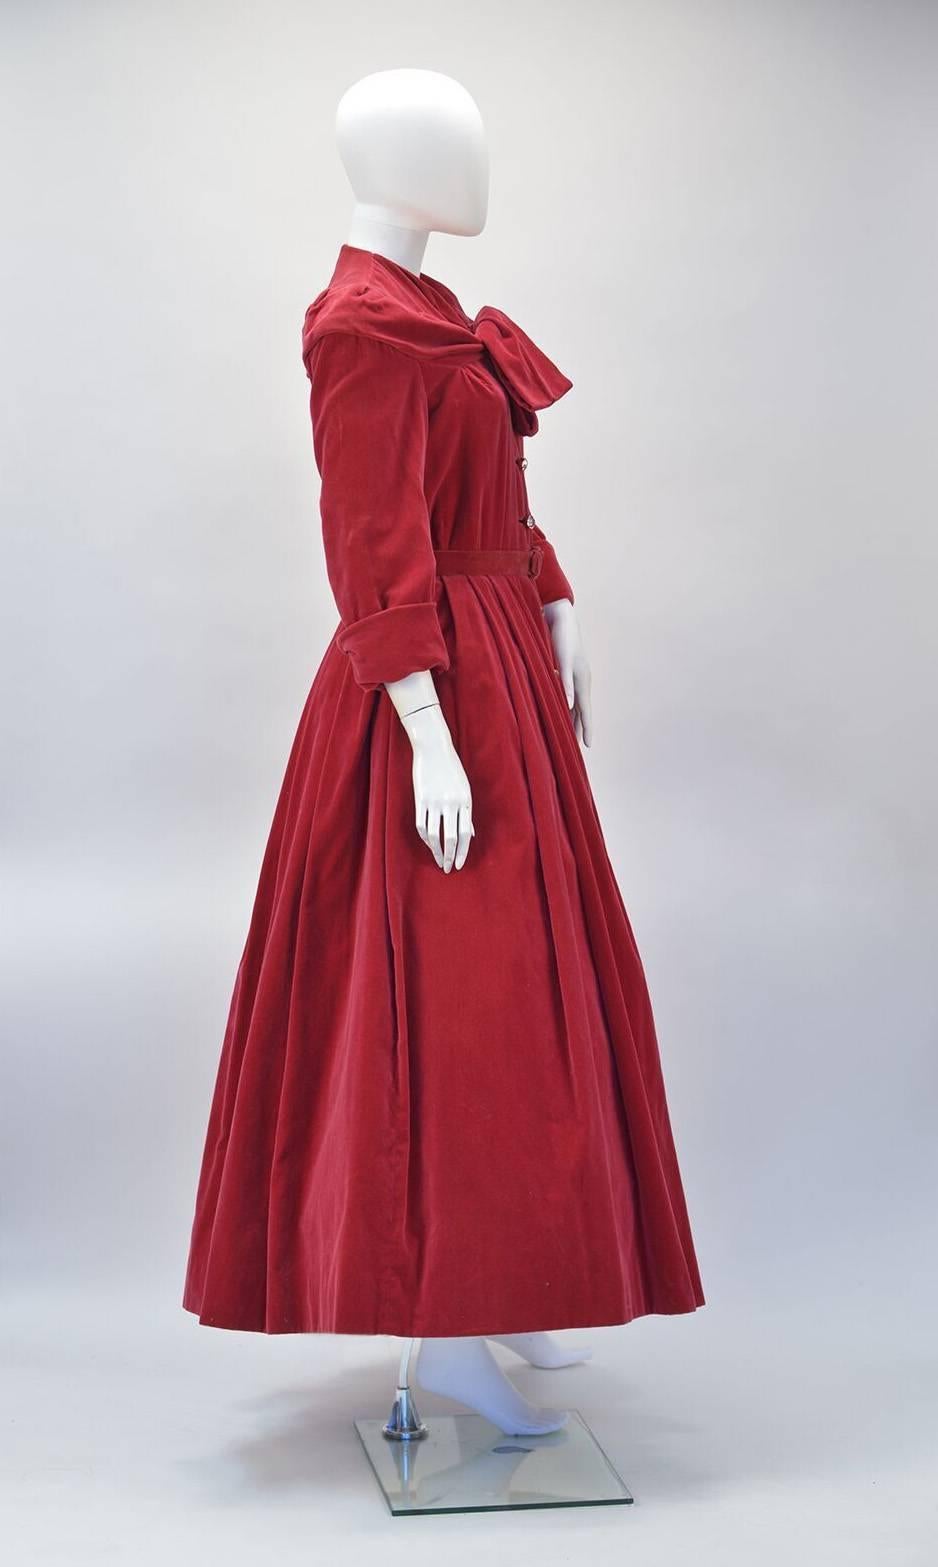 Museum Quality fabulous velvet cranberry 1950's Christian Dior dress. This dress is the epitome of the "New Look" recreated by Saint Laurent during his early years taking over the helm after Dior's sudden death.  While paying homage to his